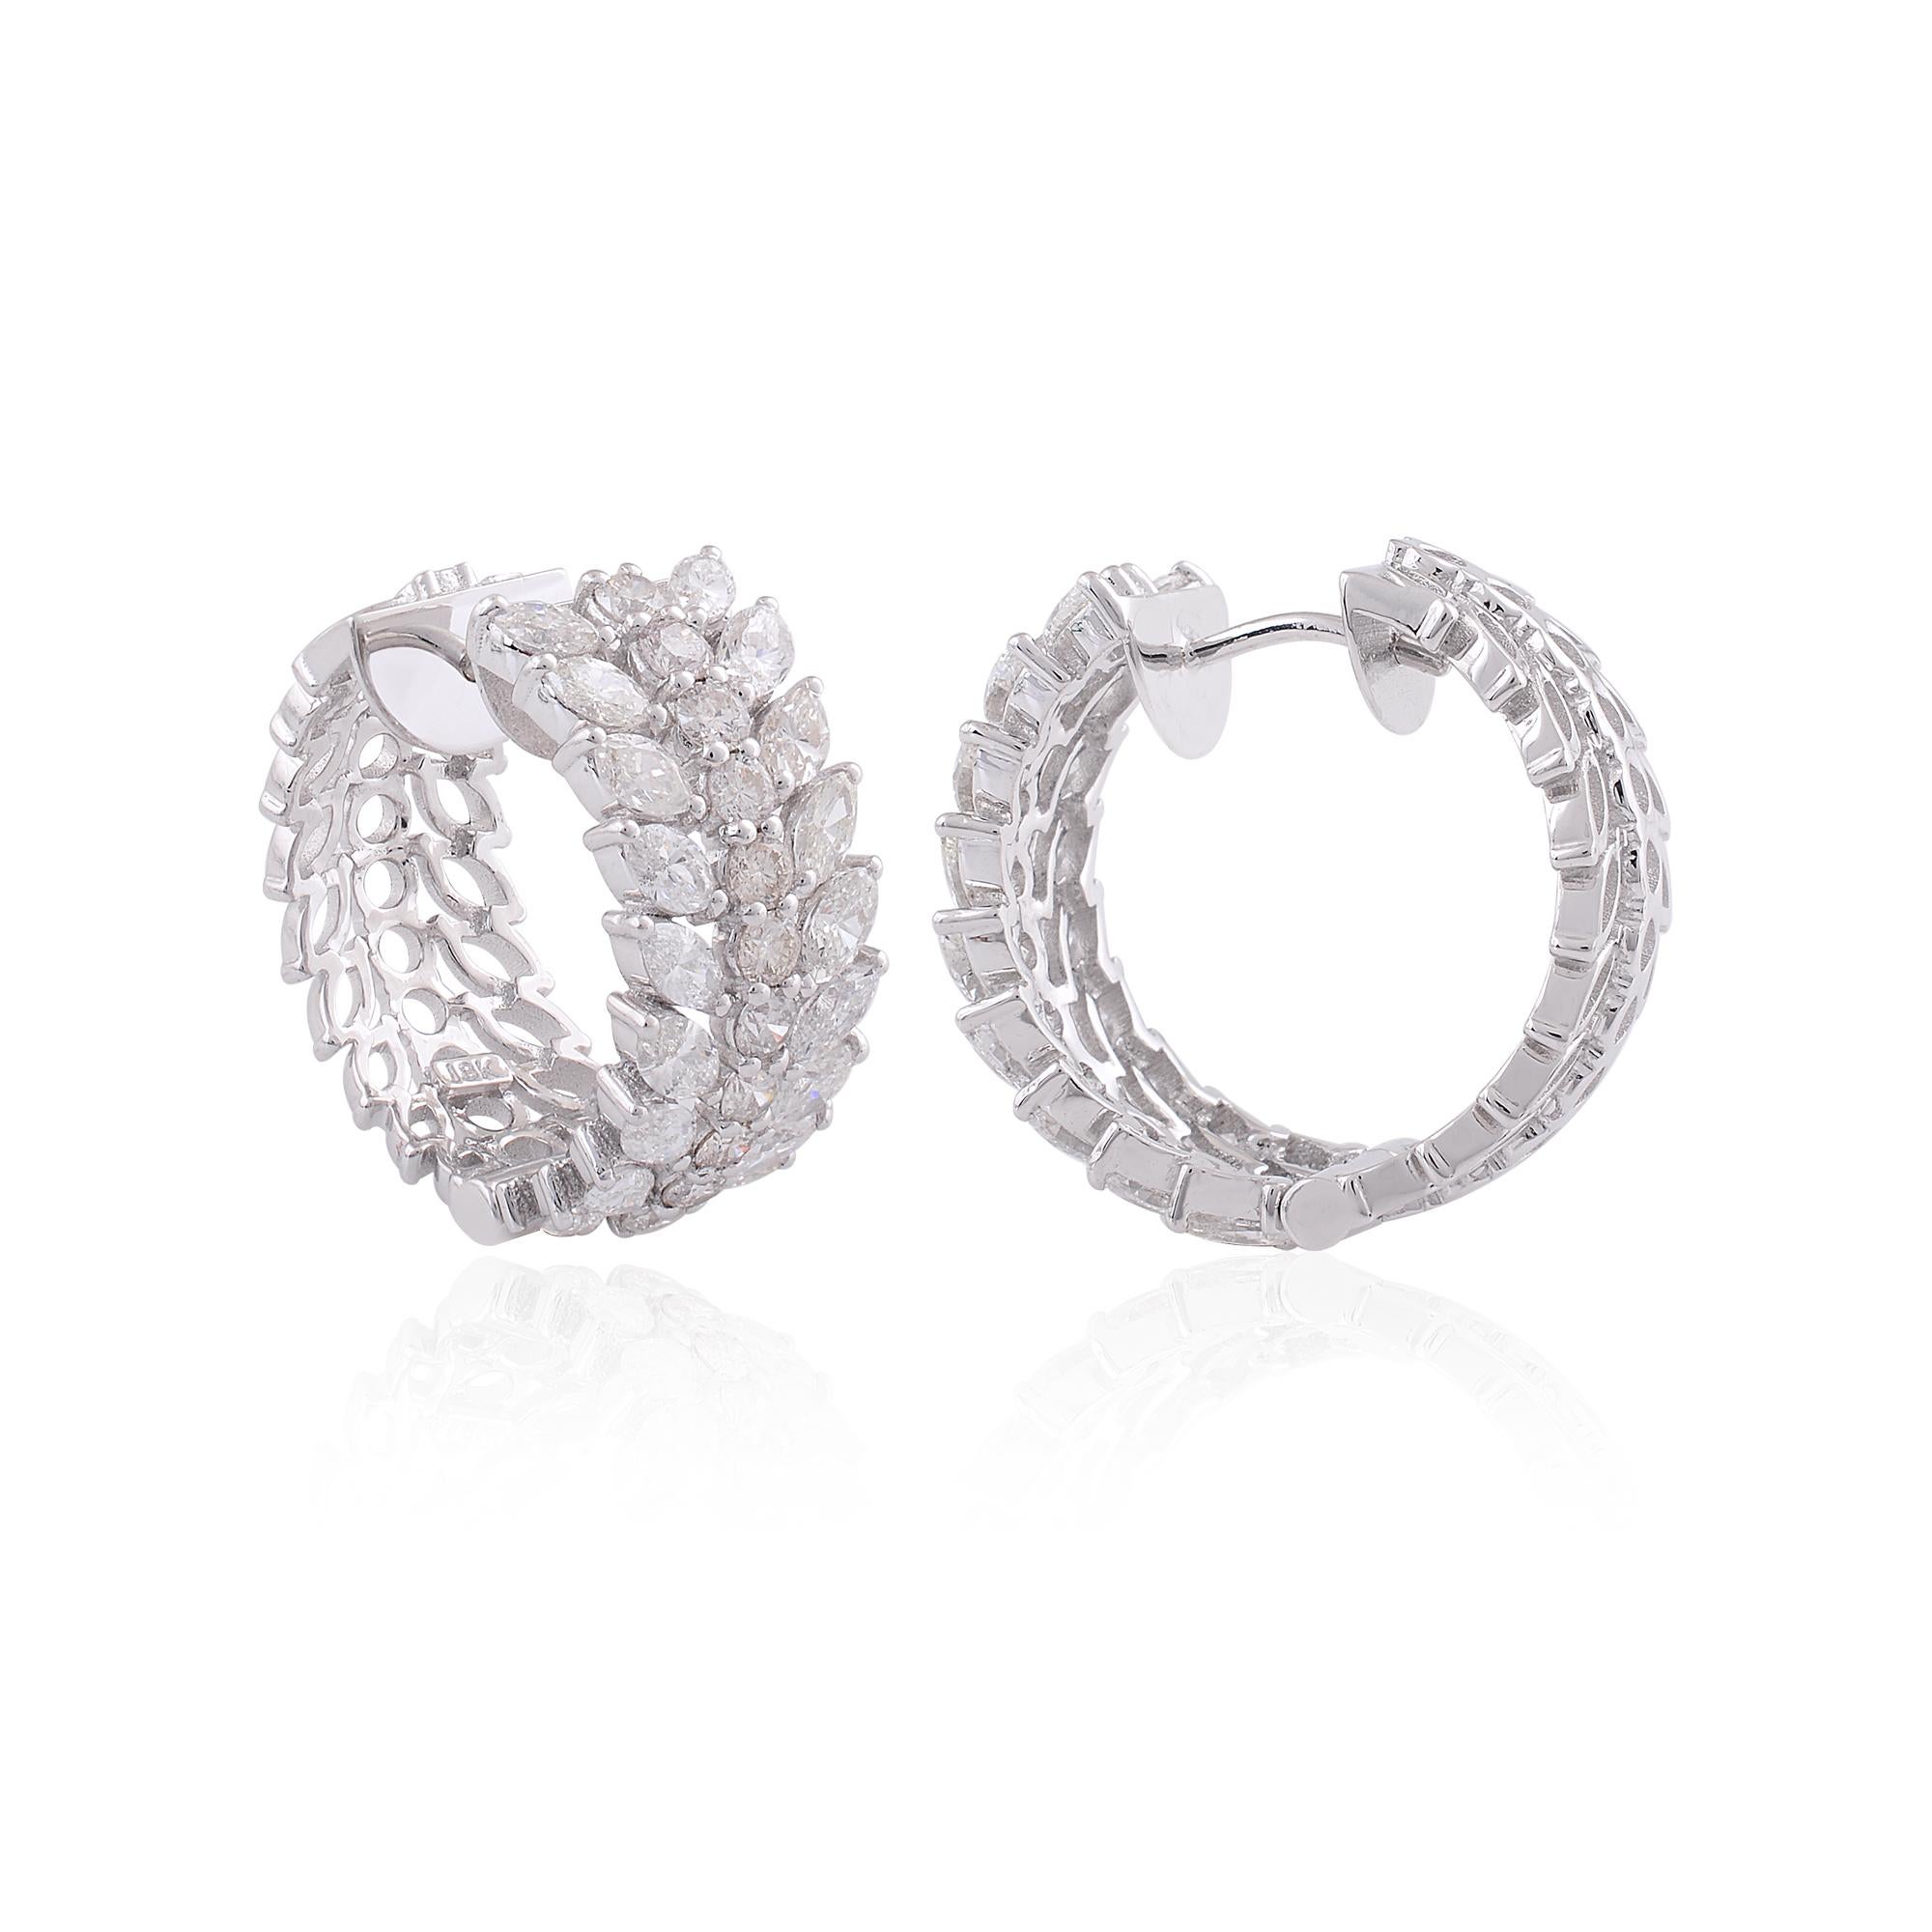 Item Code :- SEE-1454A
Gross Weight :- 13.52 gm
18k Solid White Gold Weight :- 12.55 gm
Natural Diamond Weight :- 4.85 carat  ( AVERAGE DIAMOND CLARITY SI1-SI2 & COLOR H-I )
Earrings Size :- 22x9 mm approx.

✦ Sizing
.....................
We can